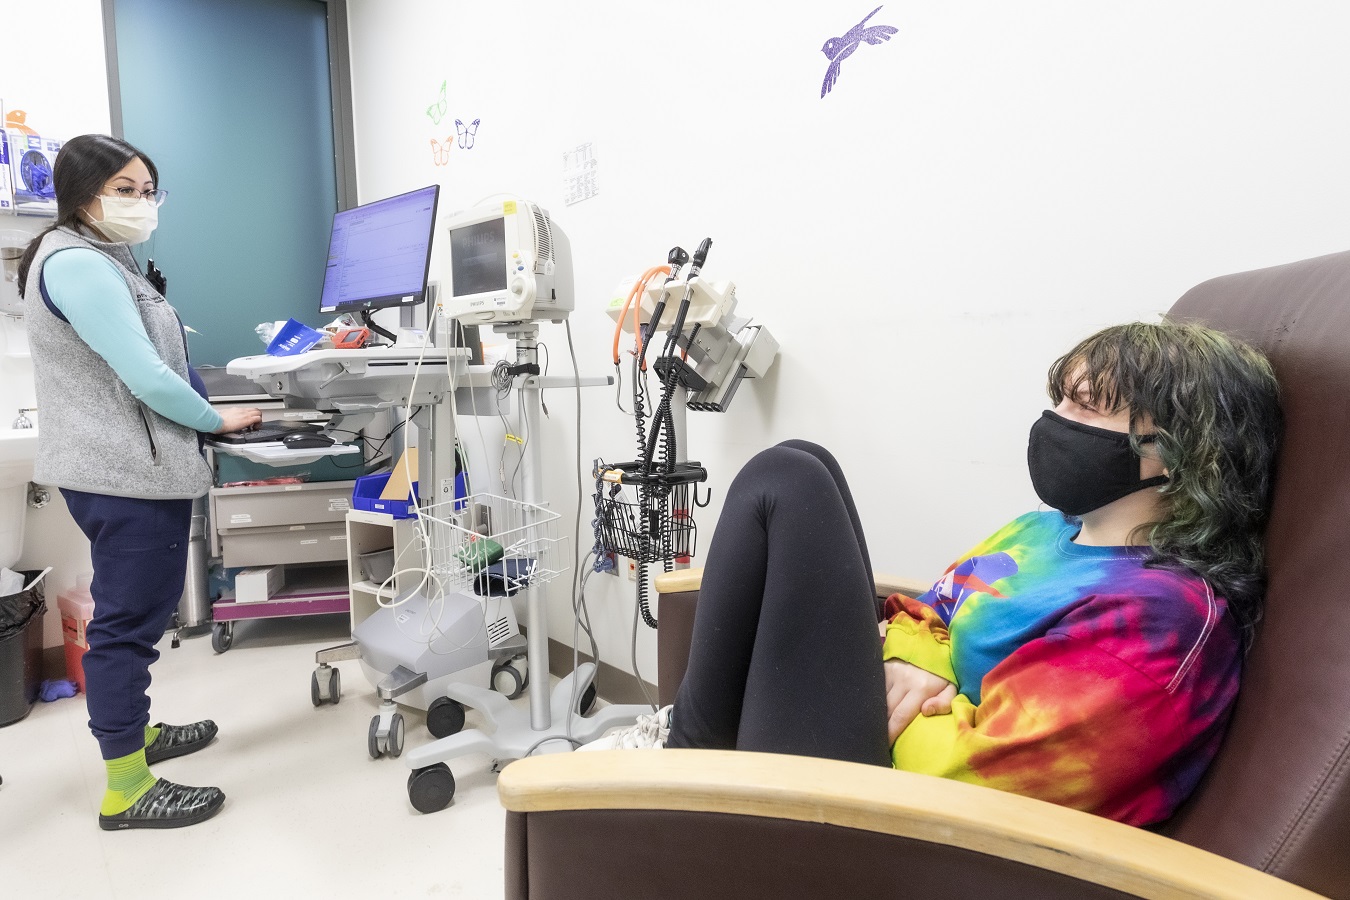 A nurse speaks with a seated patient in a tie-dyed sweatshirt